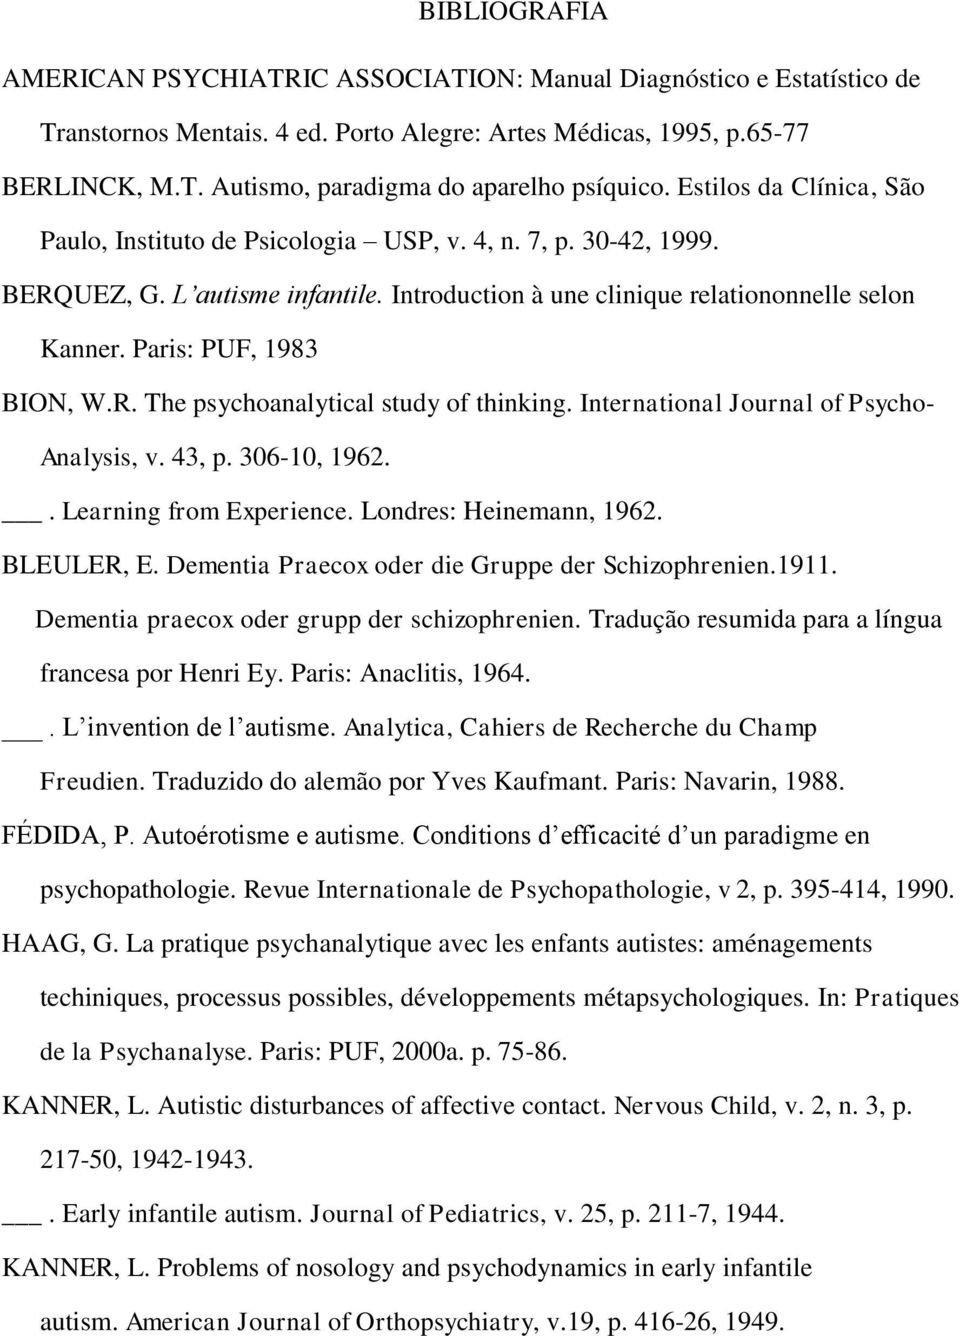 Paris: PUF, 1983 BION, W.R. The psychoanalytical study of thinking. International Journal of Psycho- Analysis, v. 43, p. 306-10, 1962.. Learning from Experience. Londres: Heinemann, 1962. BLEULER, E.